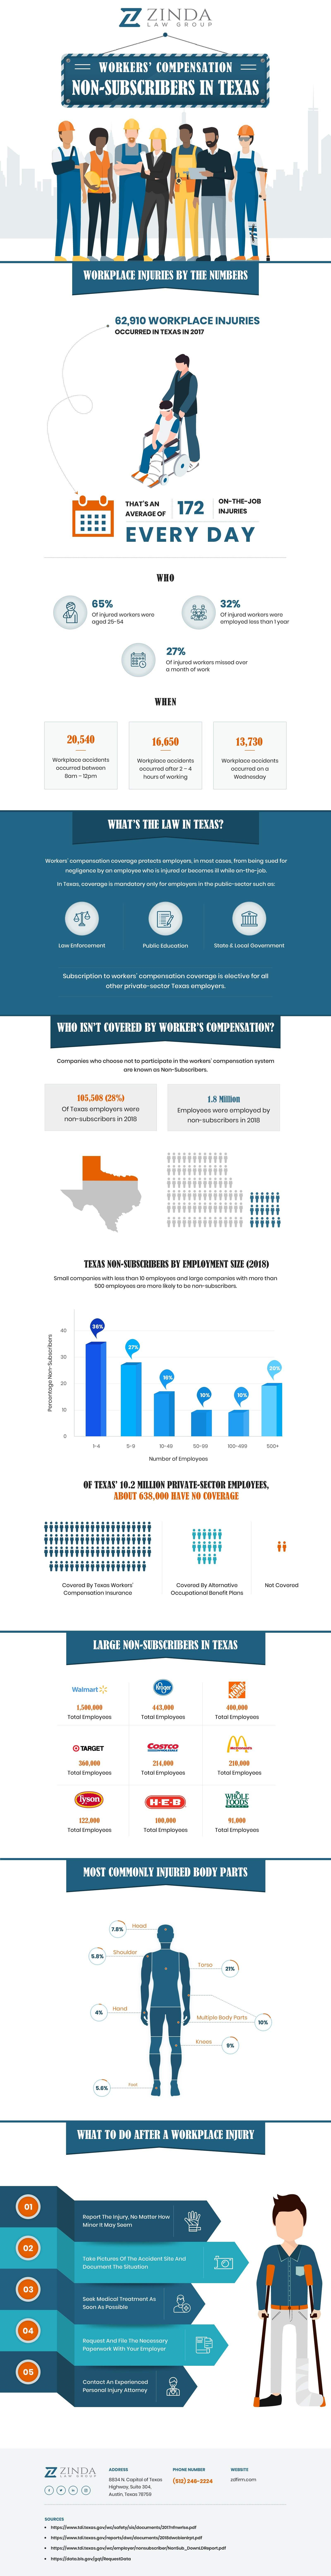 Workers' Compensation Non-Subscribers in Texas